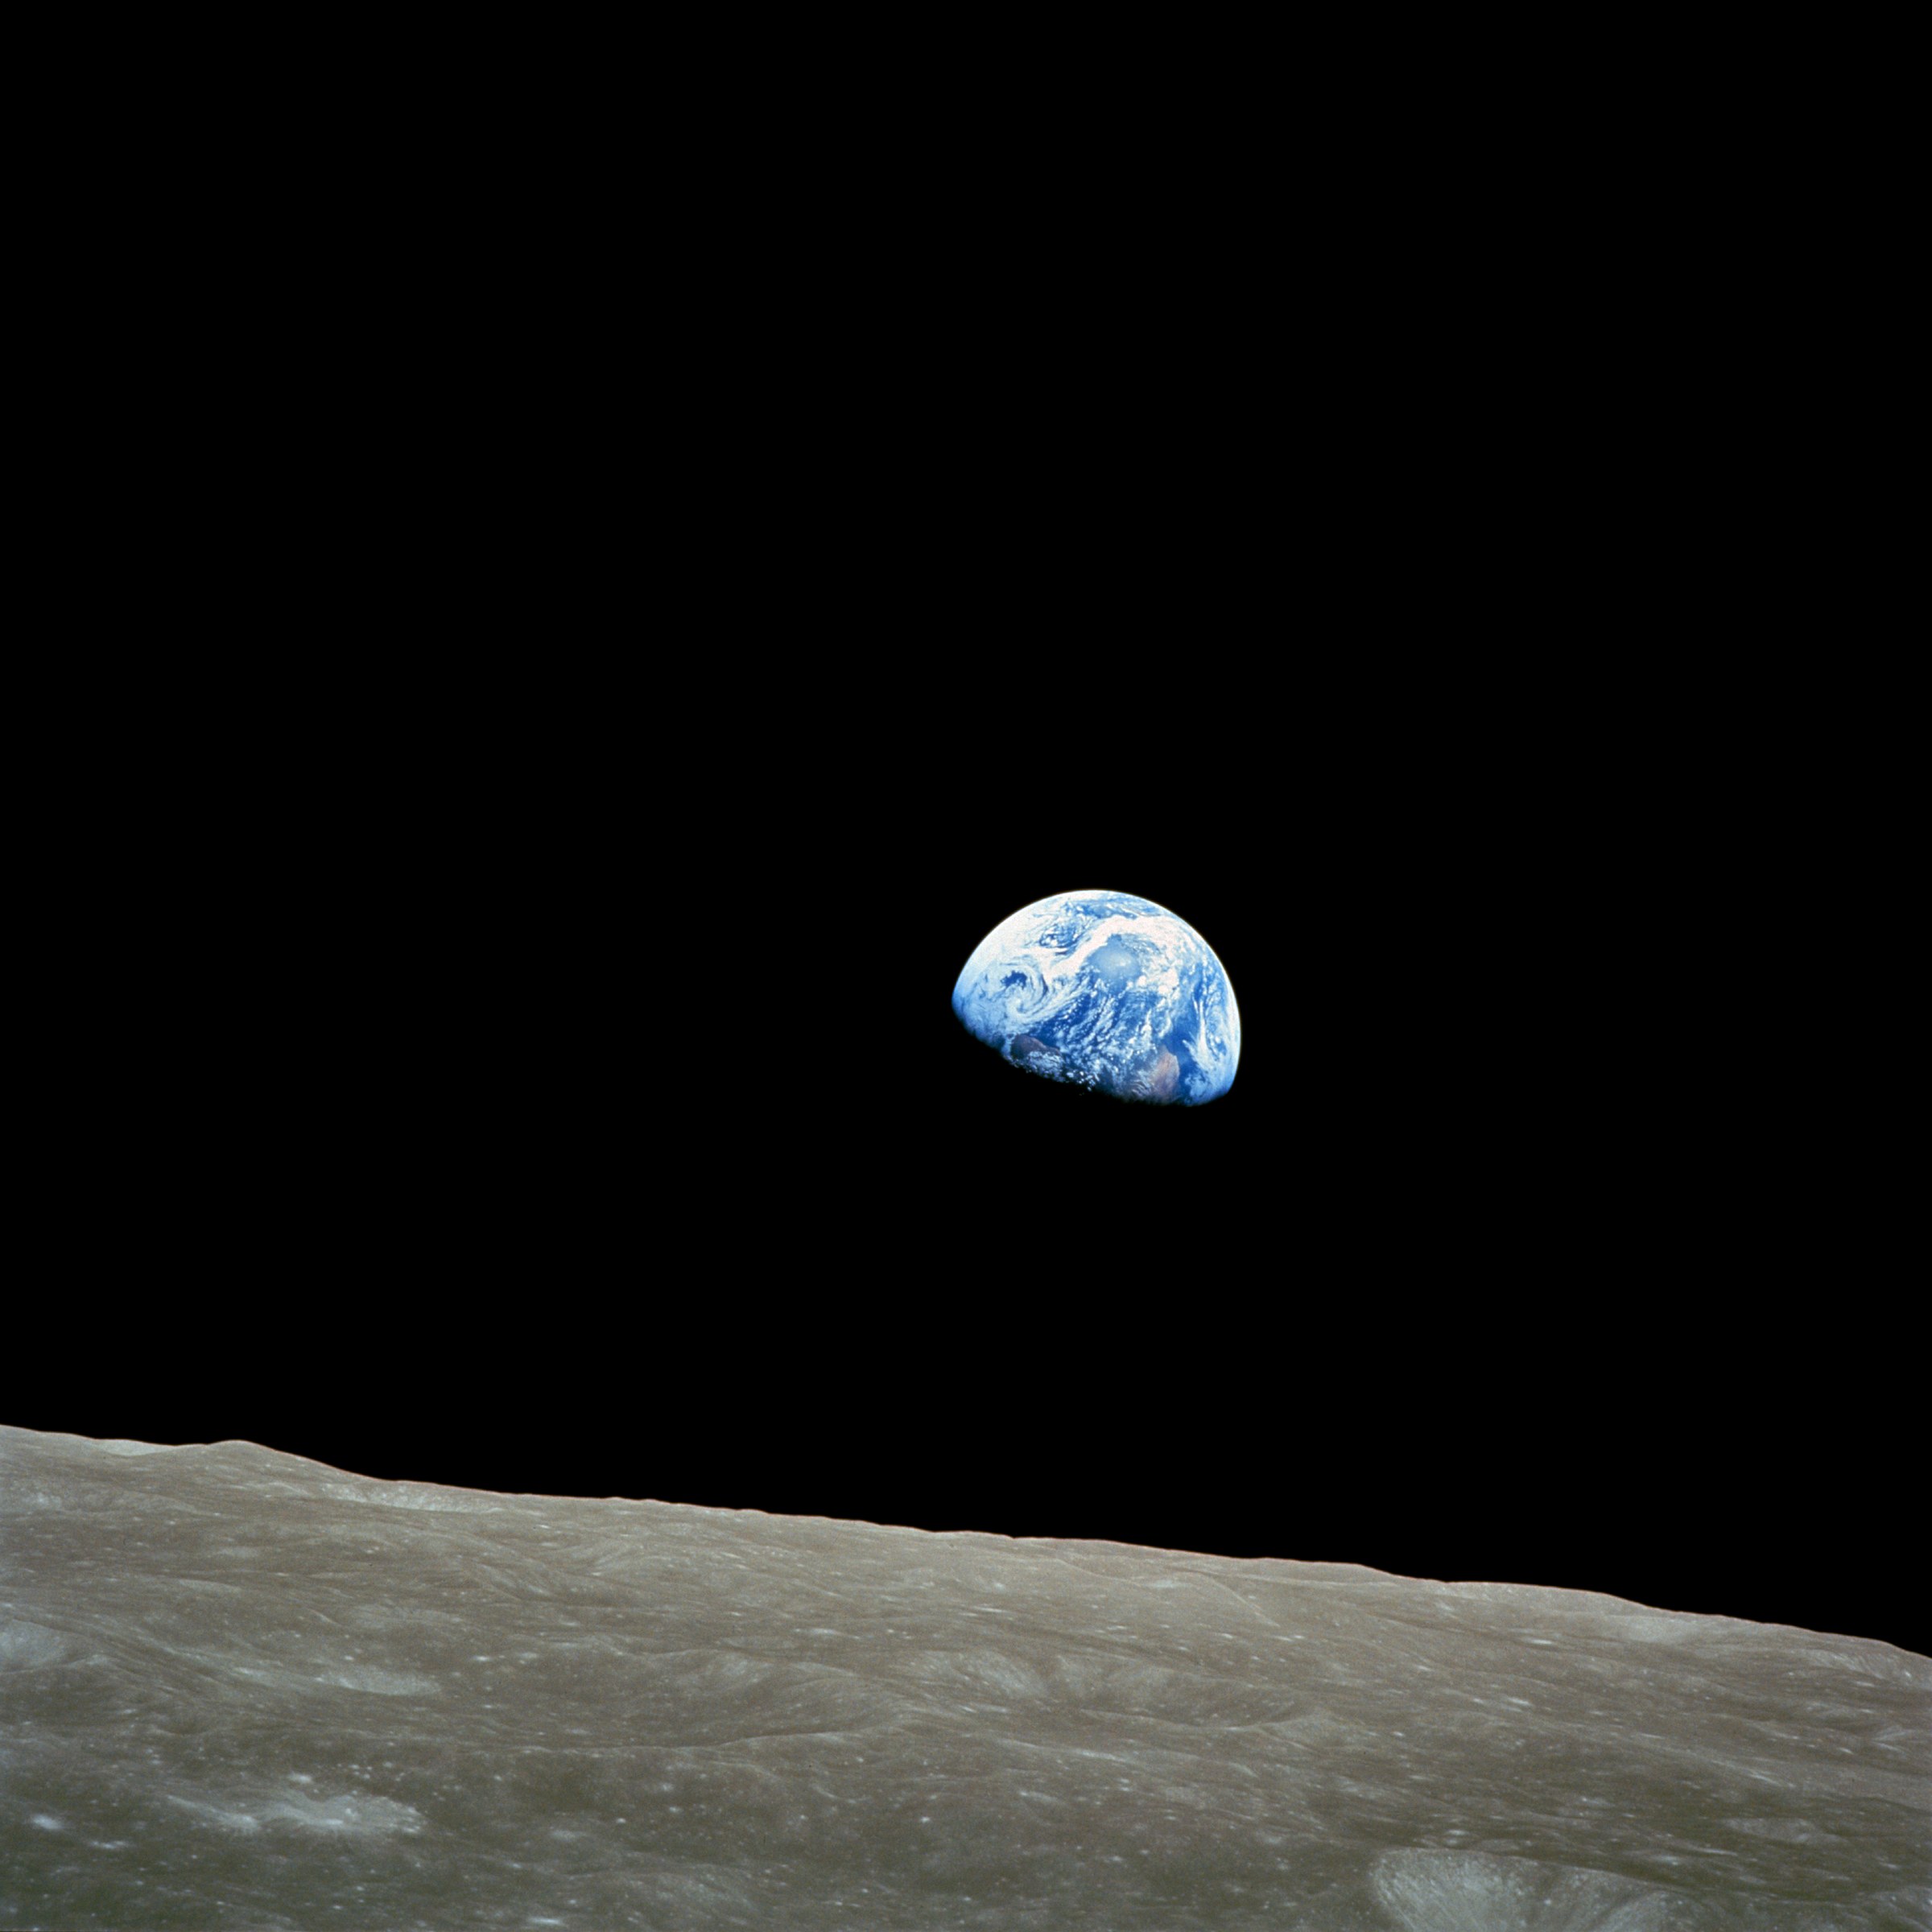 Earthrise (William A. Anders/NASA)